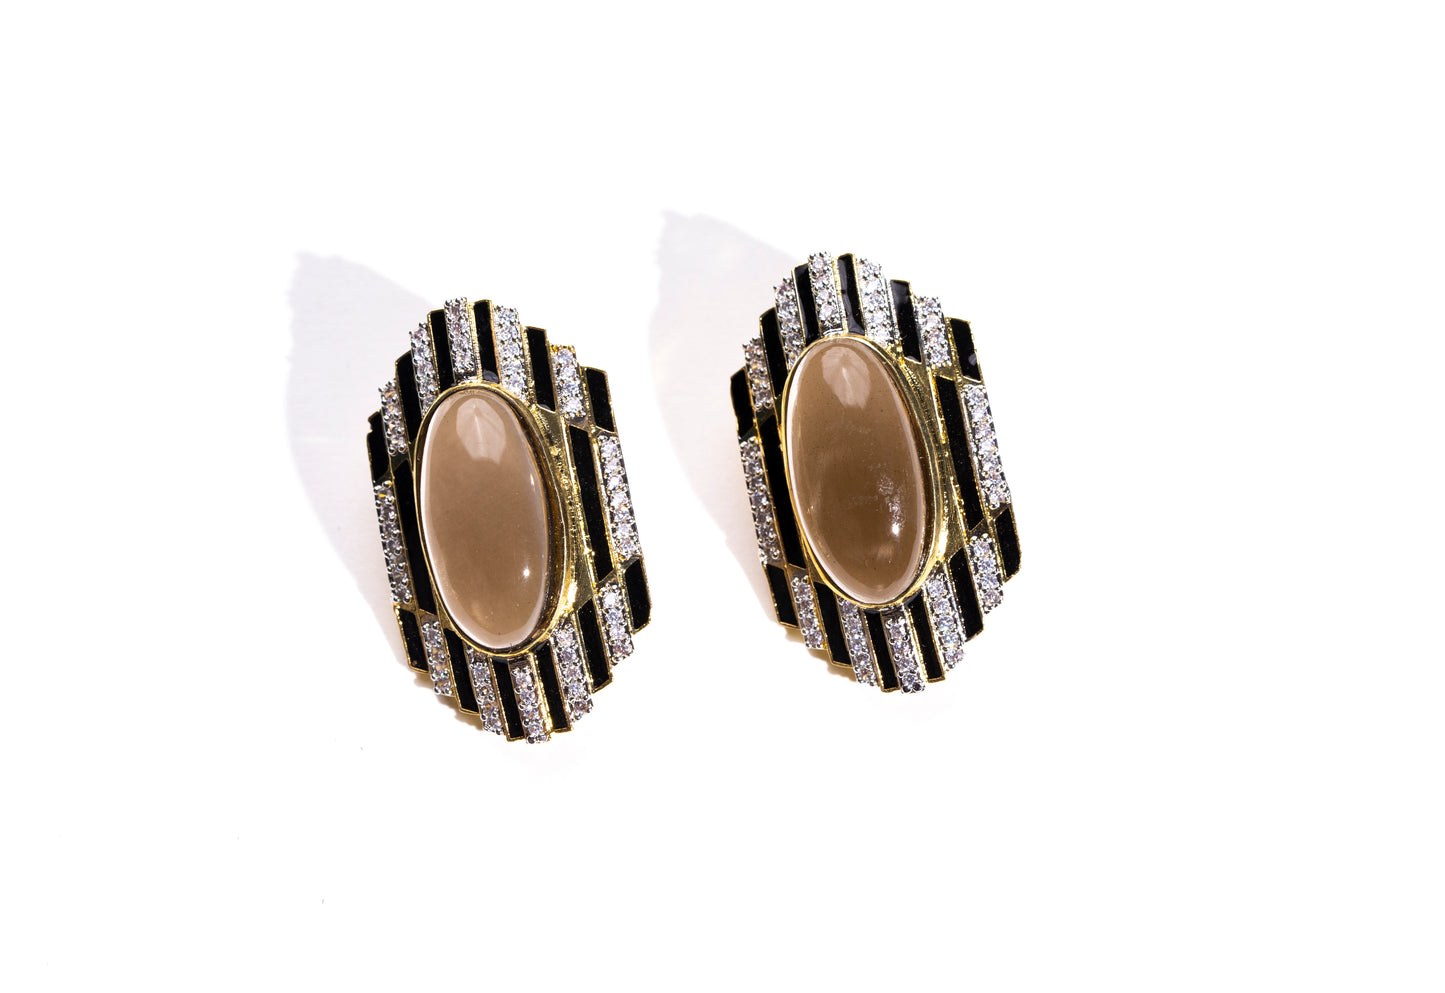 Designer Black Stone Earrings: Add sophistication to your style with these one-of-a-kind earrings